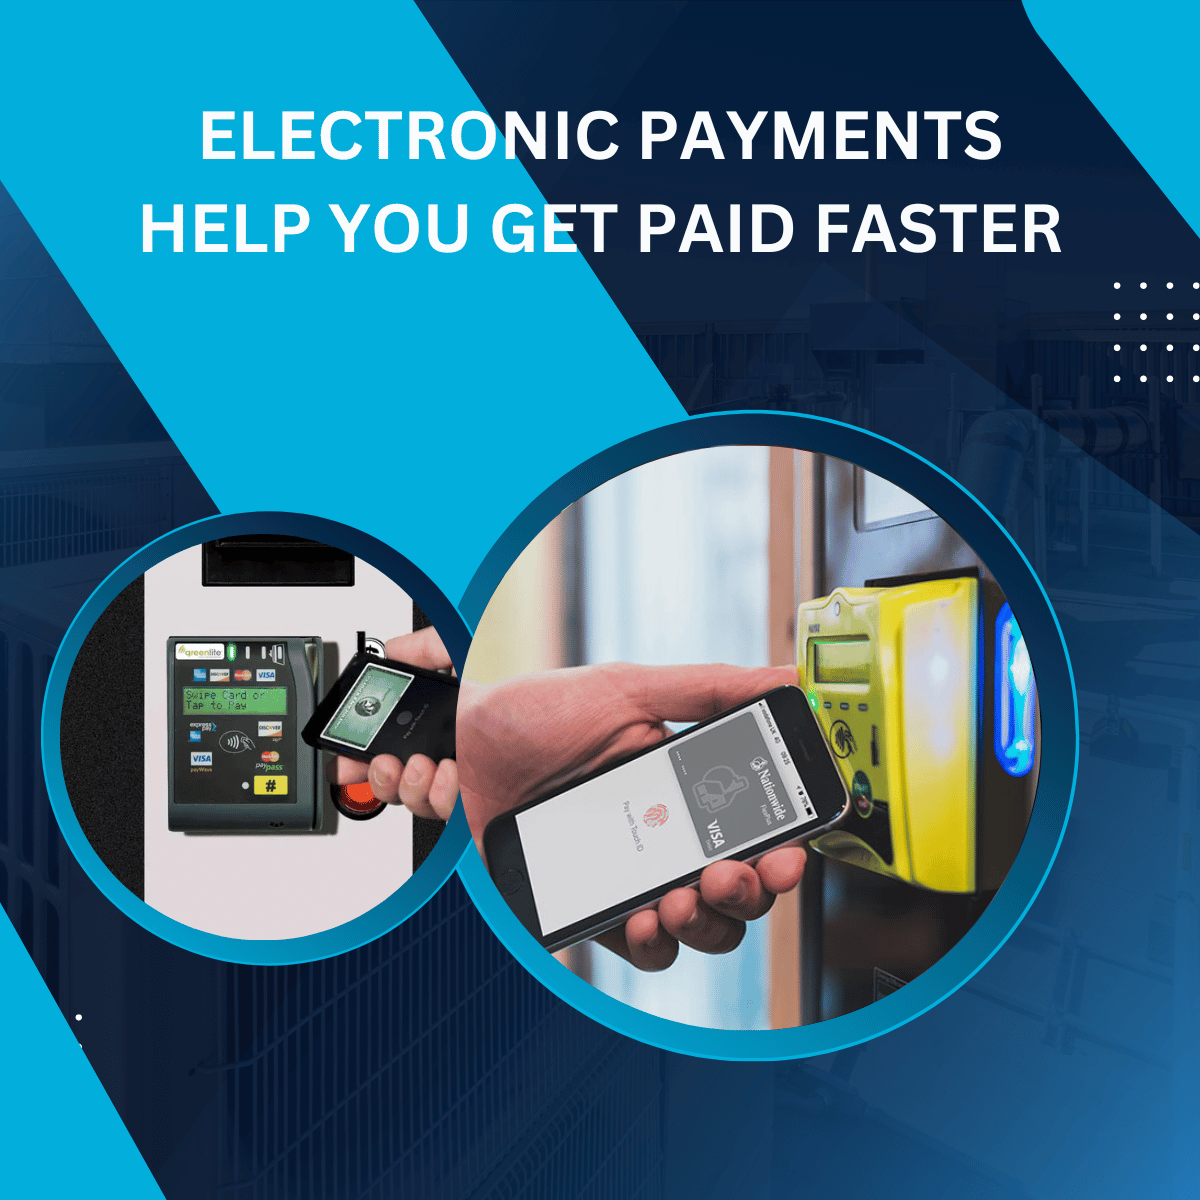 ELECTRONIC PAYMENTS HELP YOU GET PAID FASTER